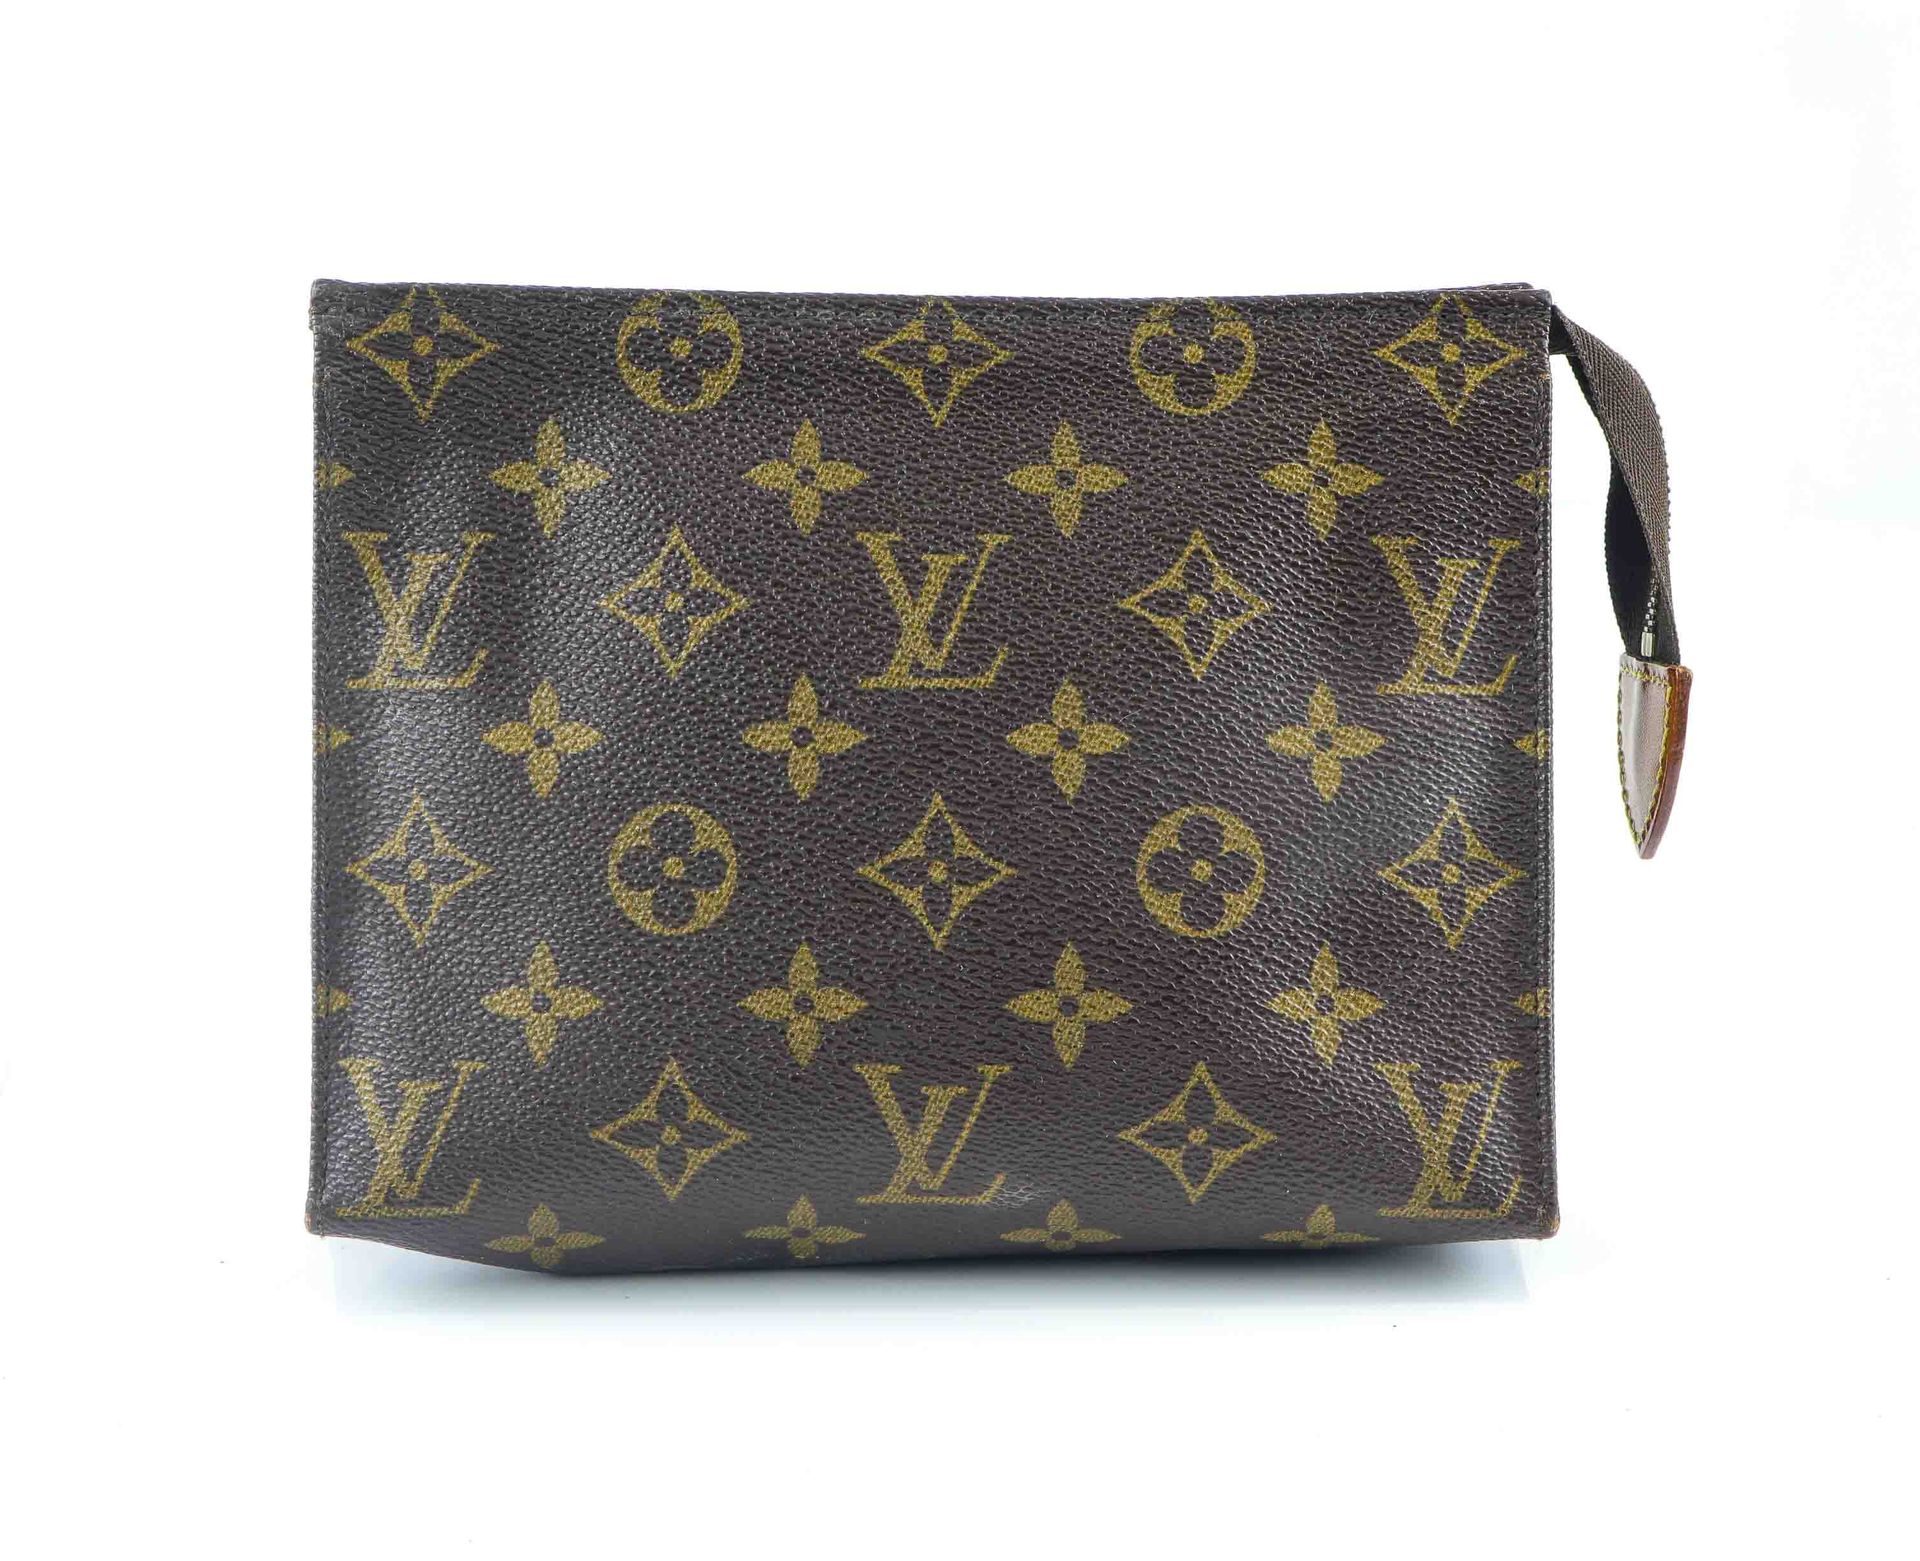 Louis VUITTON - Monogrammed canvas pouch - Nude leather …